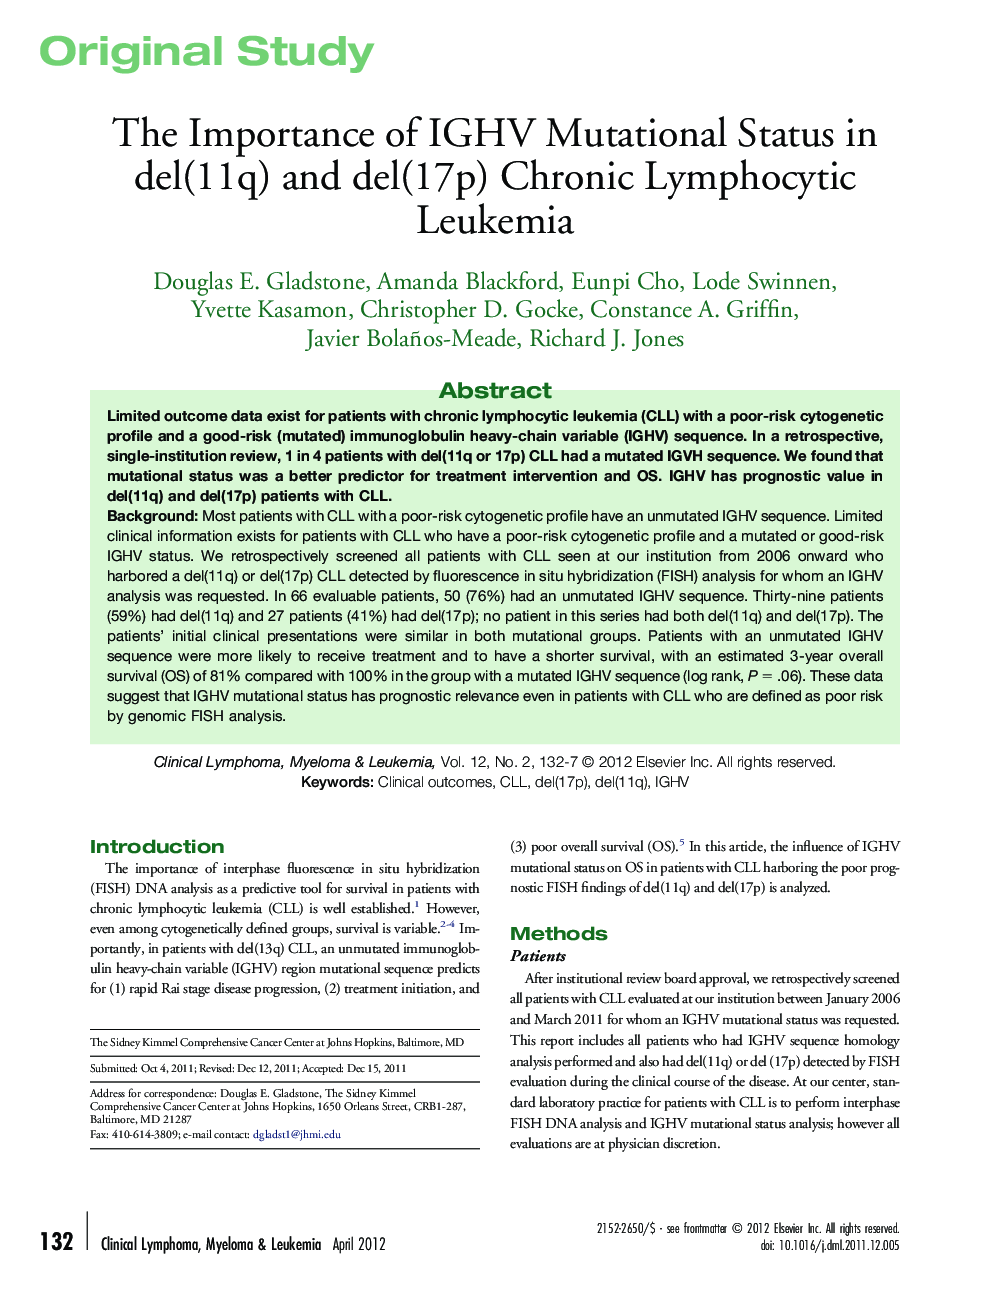 The Importance of IGHV Mutational Status in del(11q) and del(17p) Chronic Lymphocytic Leukemia